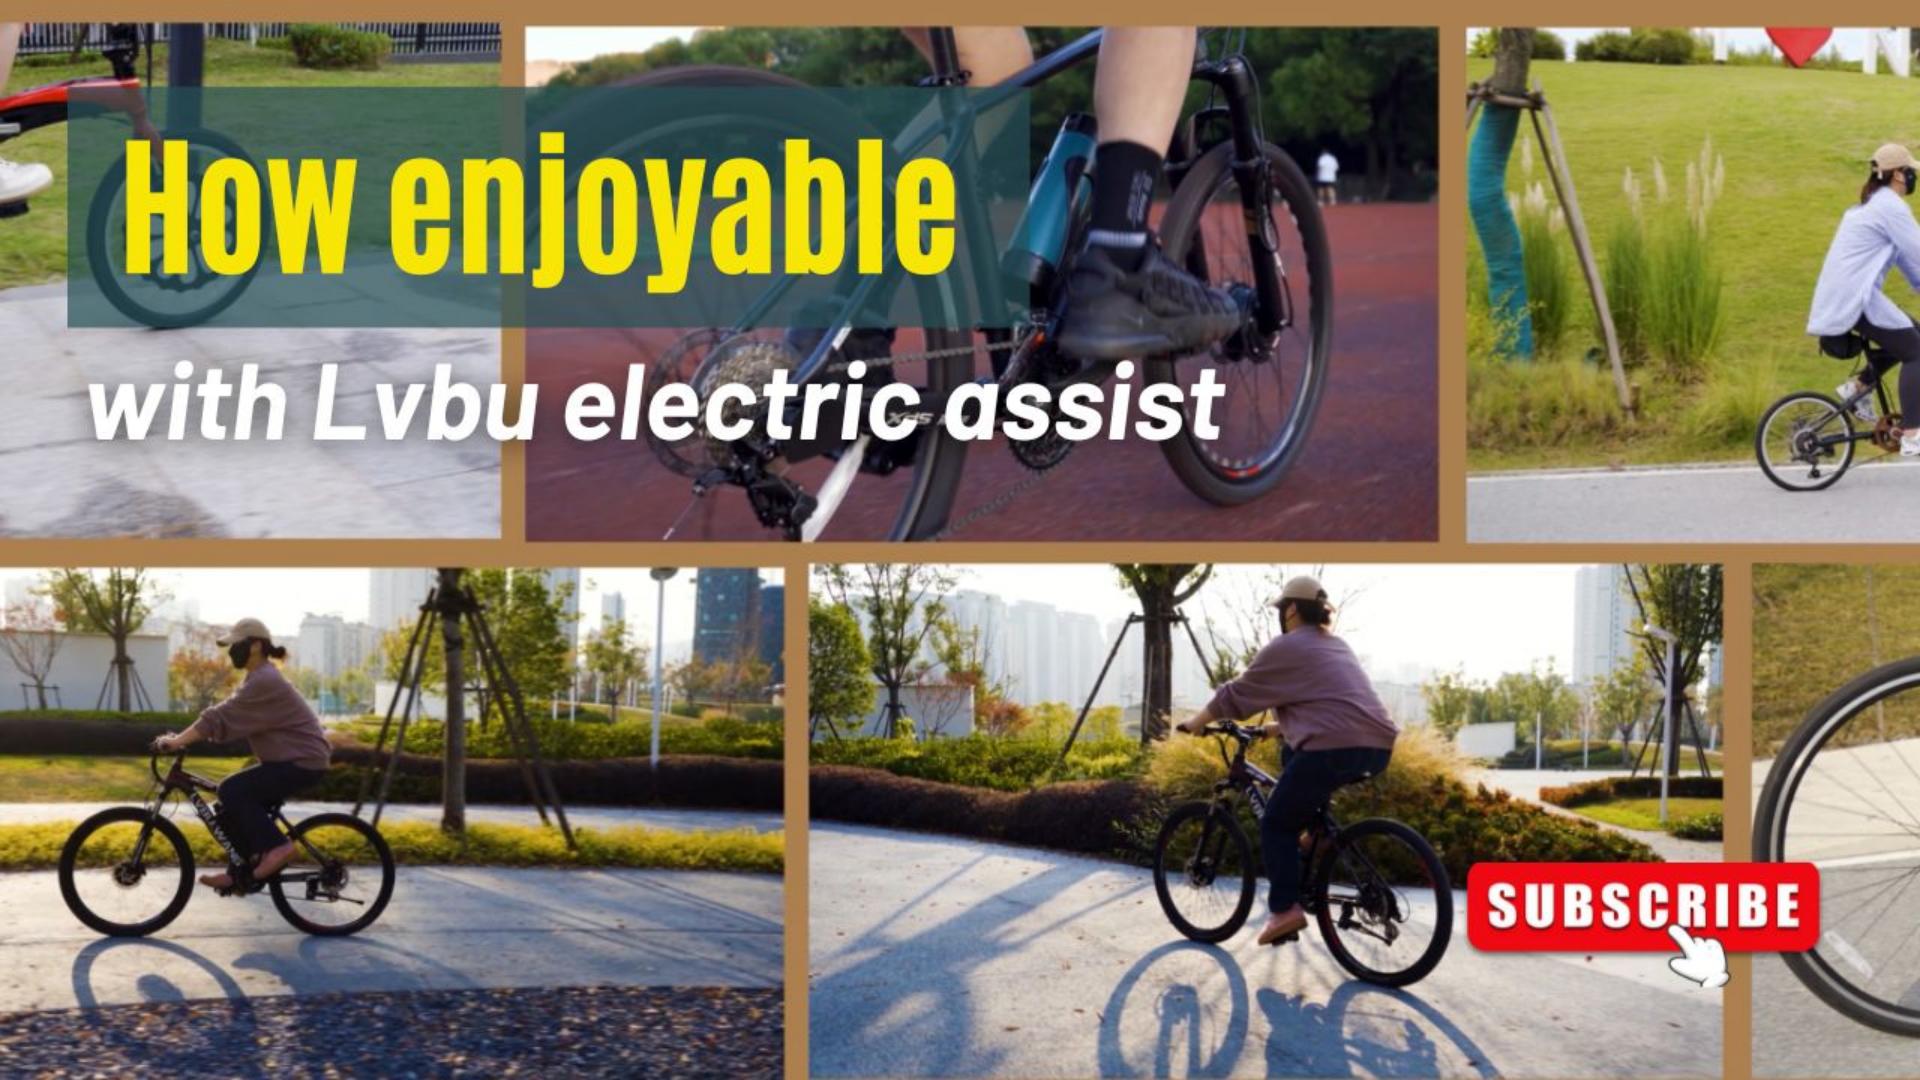 How enjoyable is riding with Lvbu electric assist?